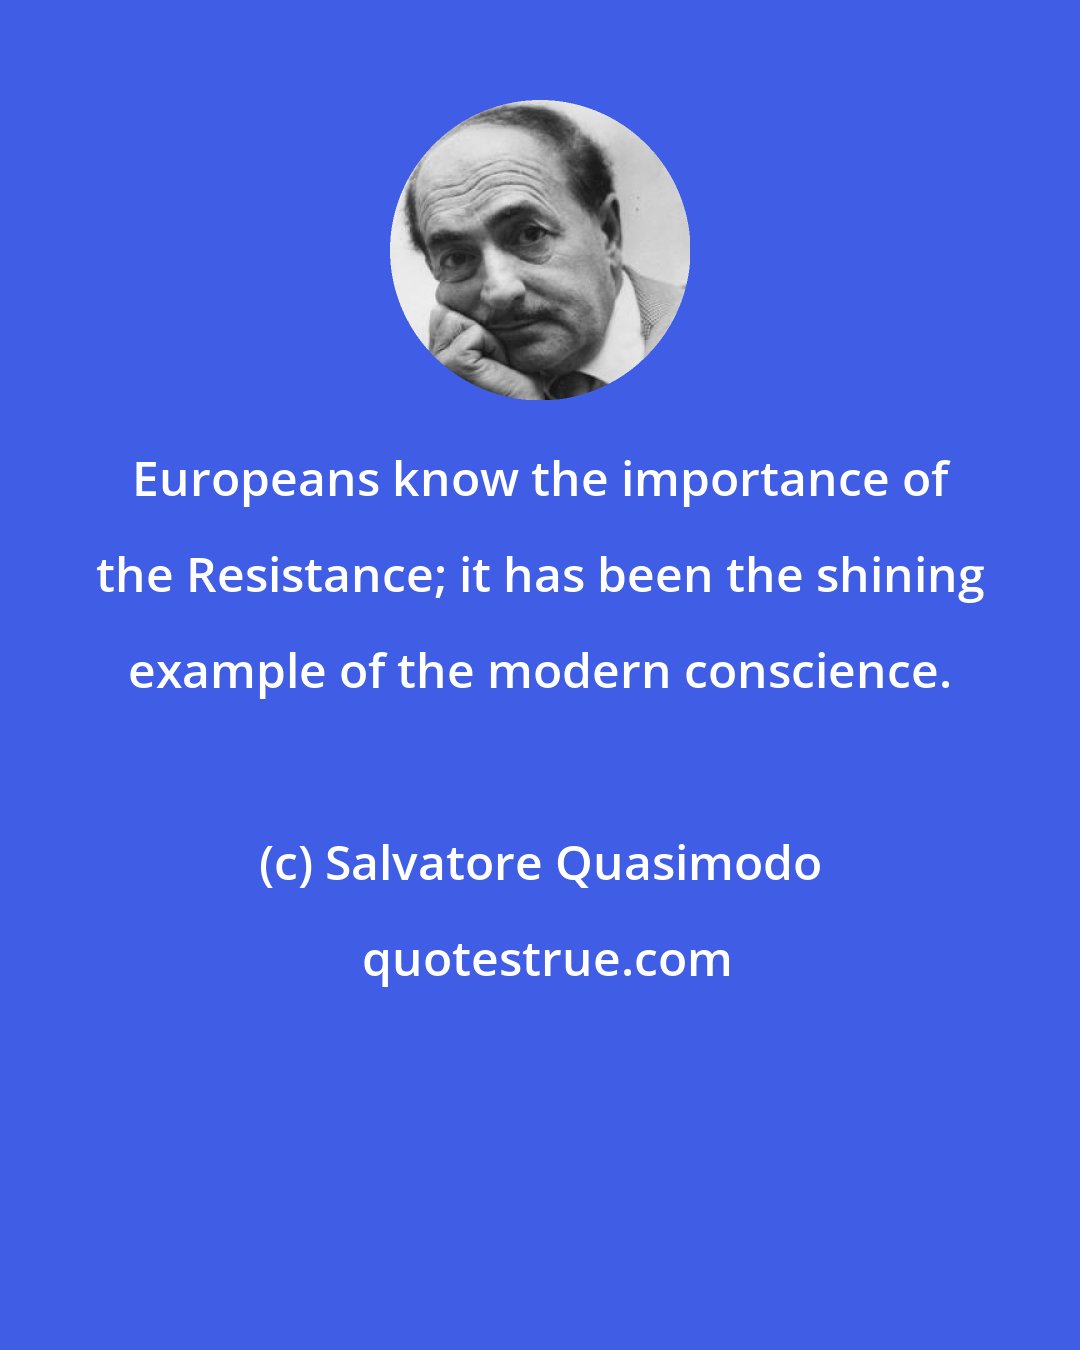 Salvatore Quasimodo: Europeans know the importance of the Resistance; it has been the shining example of the modern conscience.